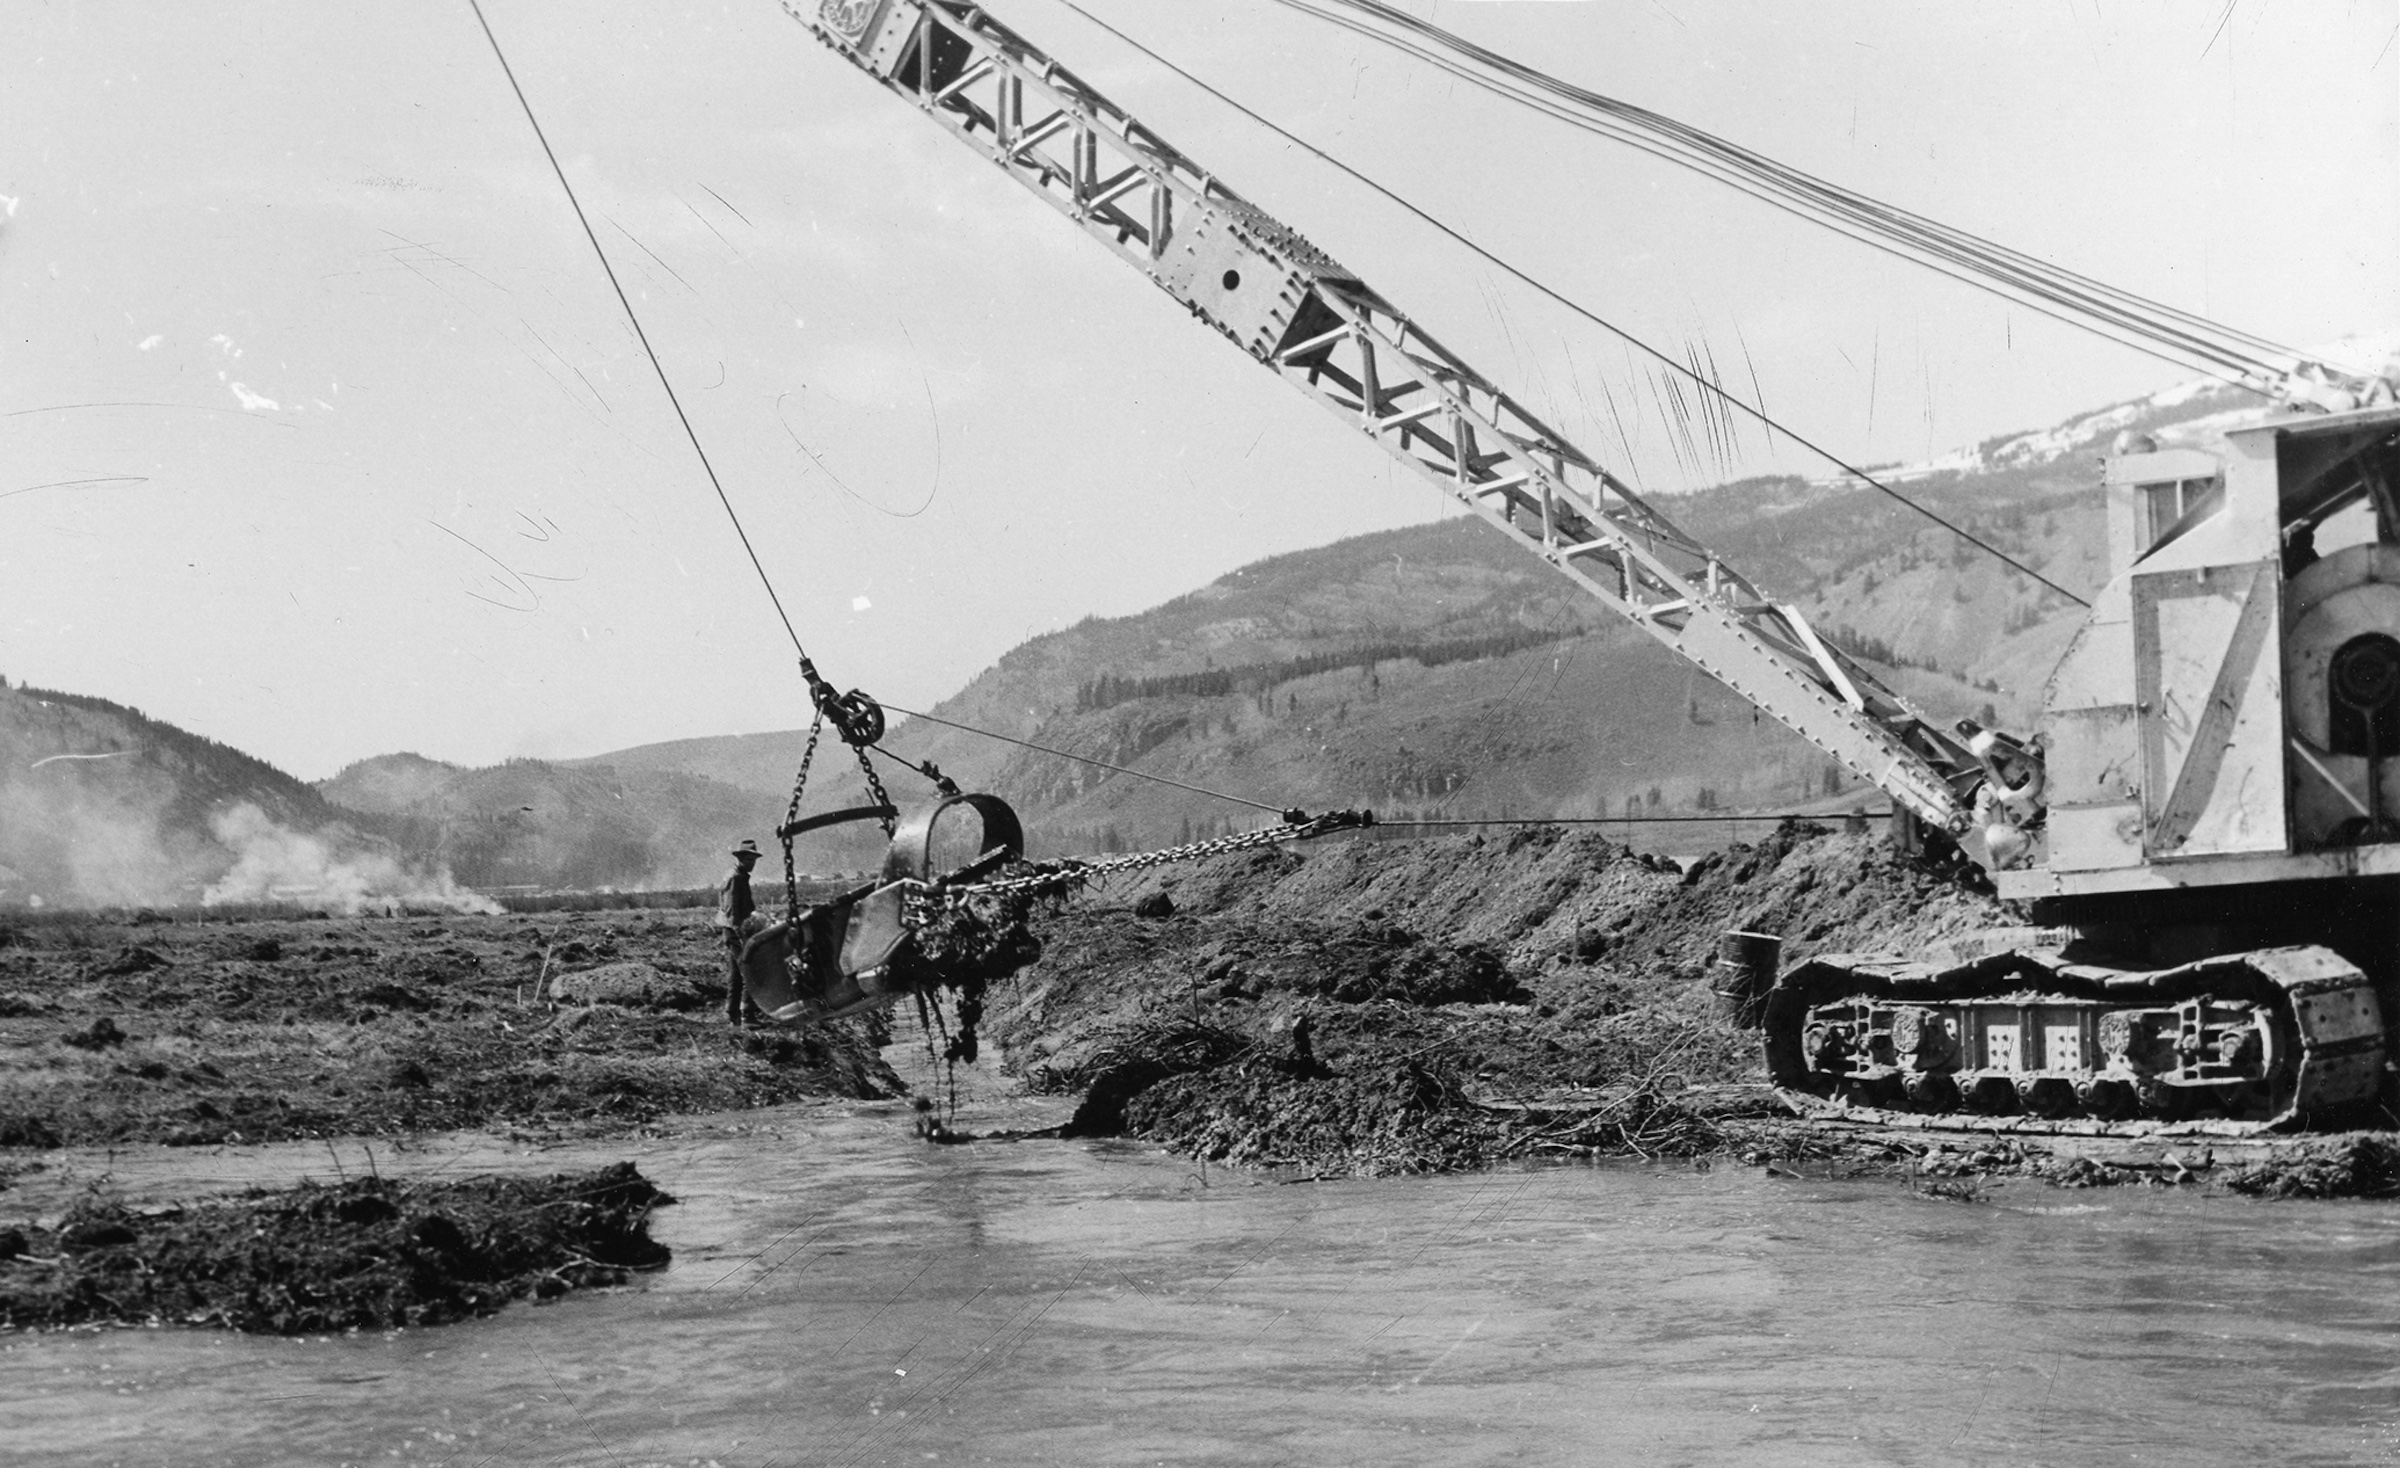 A crane doing construction work at the Eagle River.